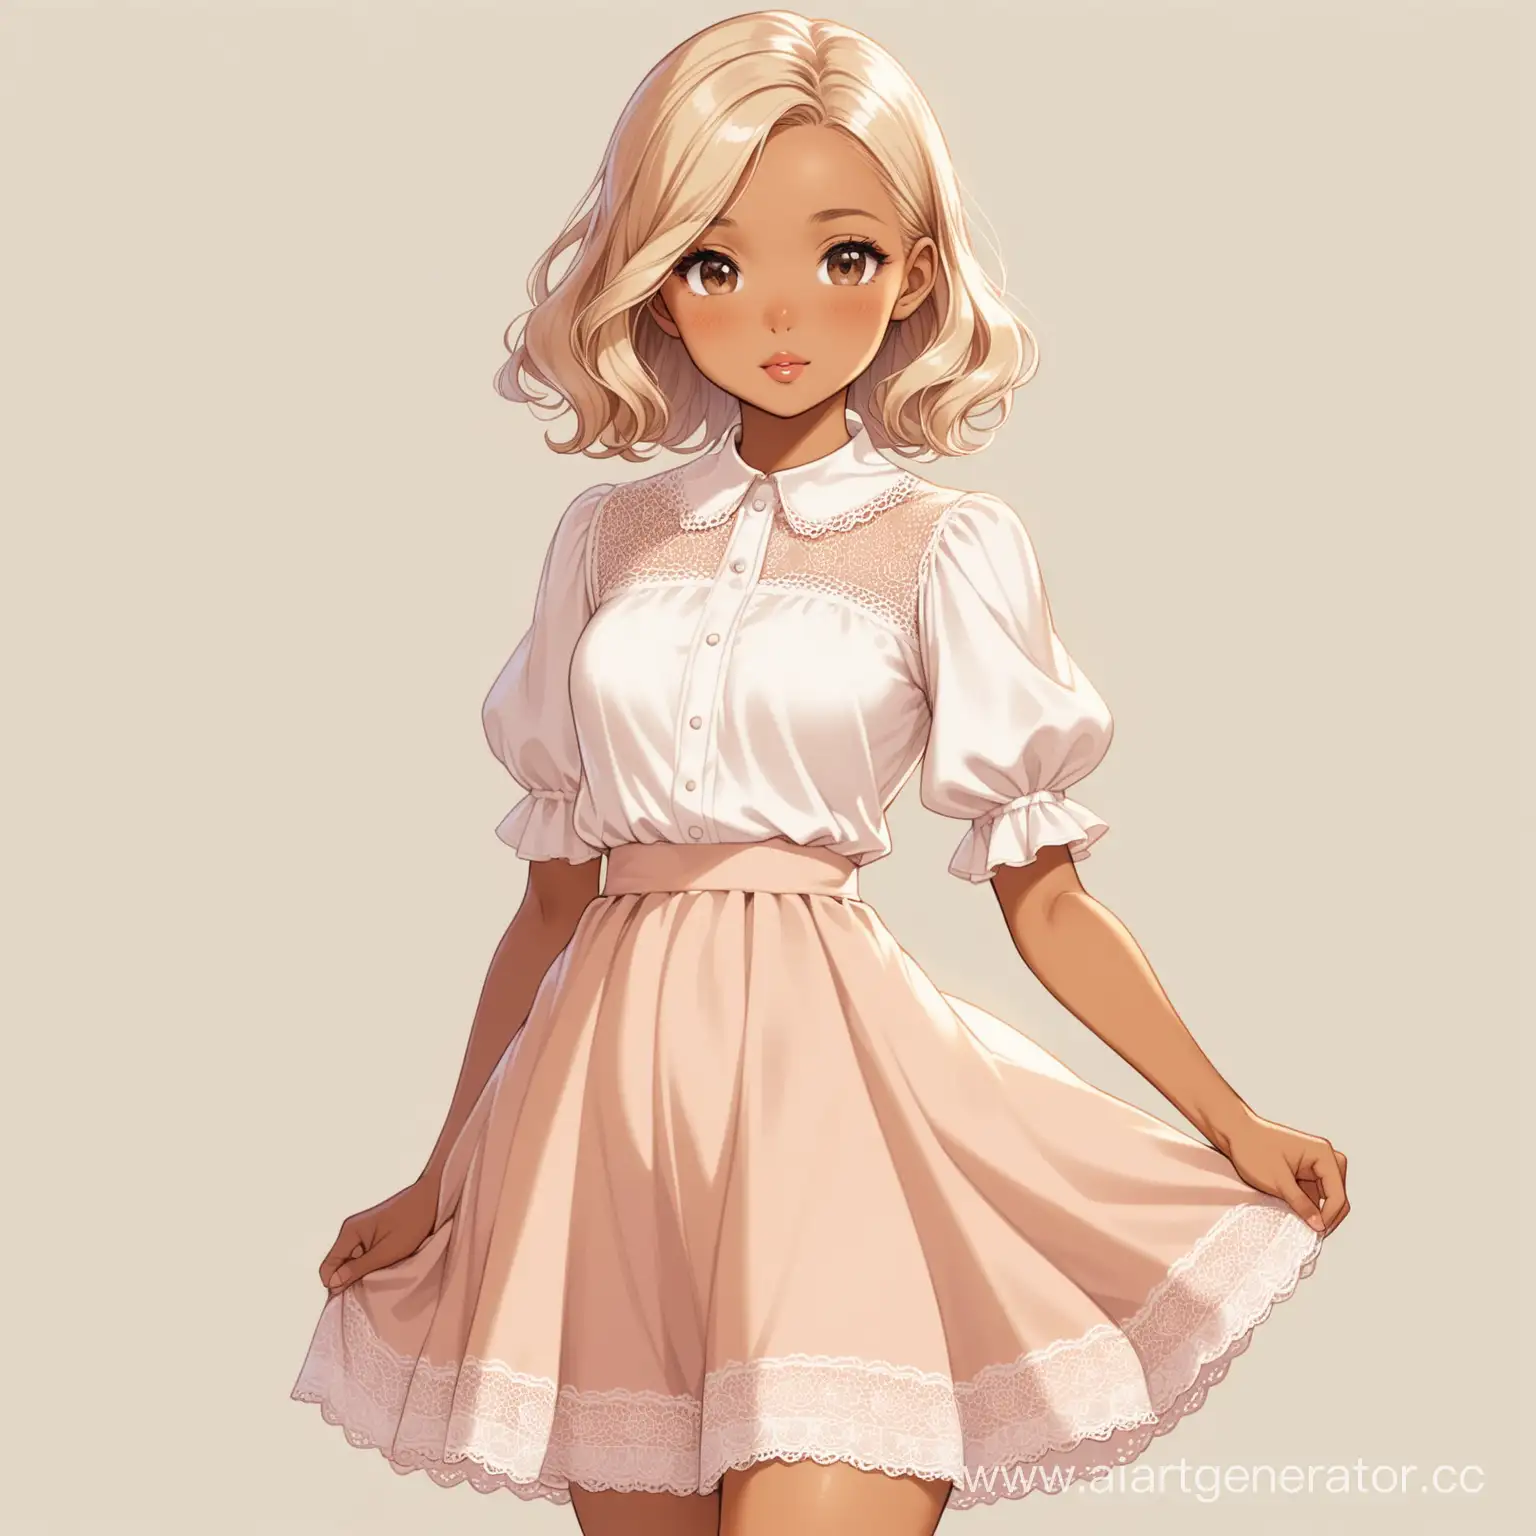 A short, thin girl, Light blonde wavy shoulder length hair, Tanned skin color, Light brown eyes, Soft pink lips, Miniature nose, Small, firm breasts, Wide hips, Cream vintage blouse with puff sleeves, White blouse's collar with lace edges, Light brown flared skirt just below the knee.